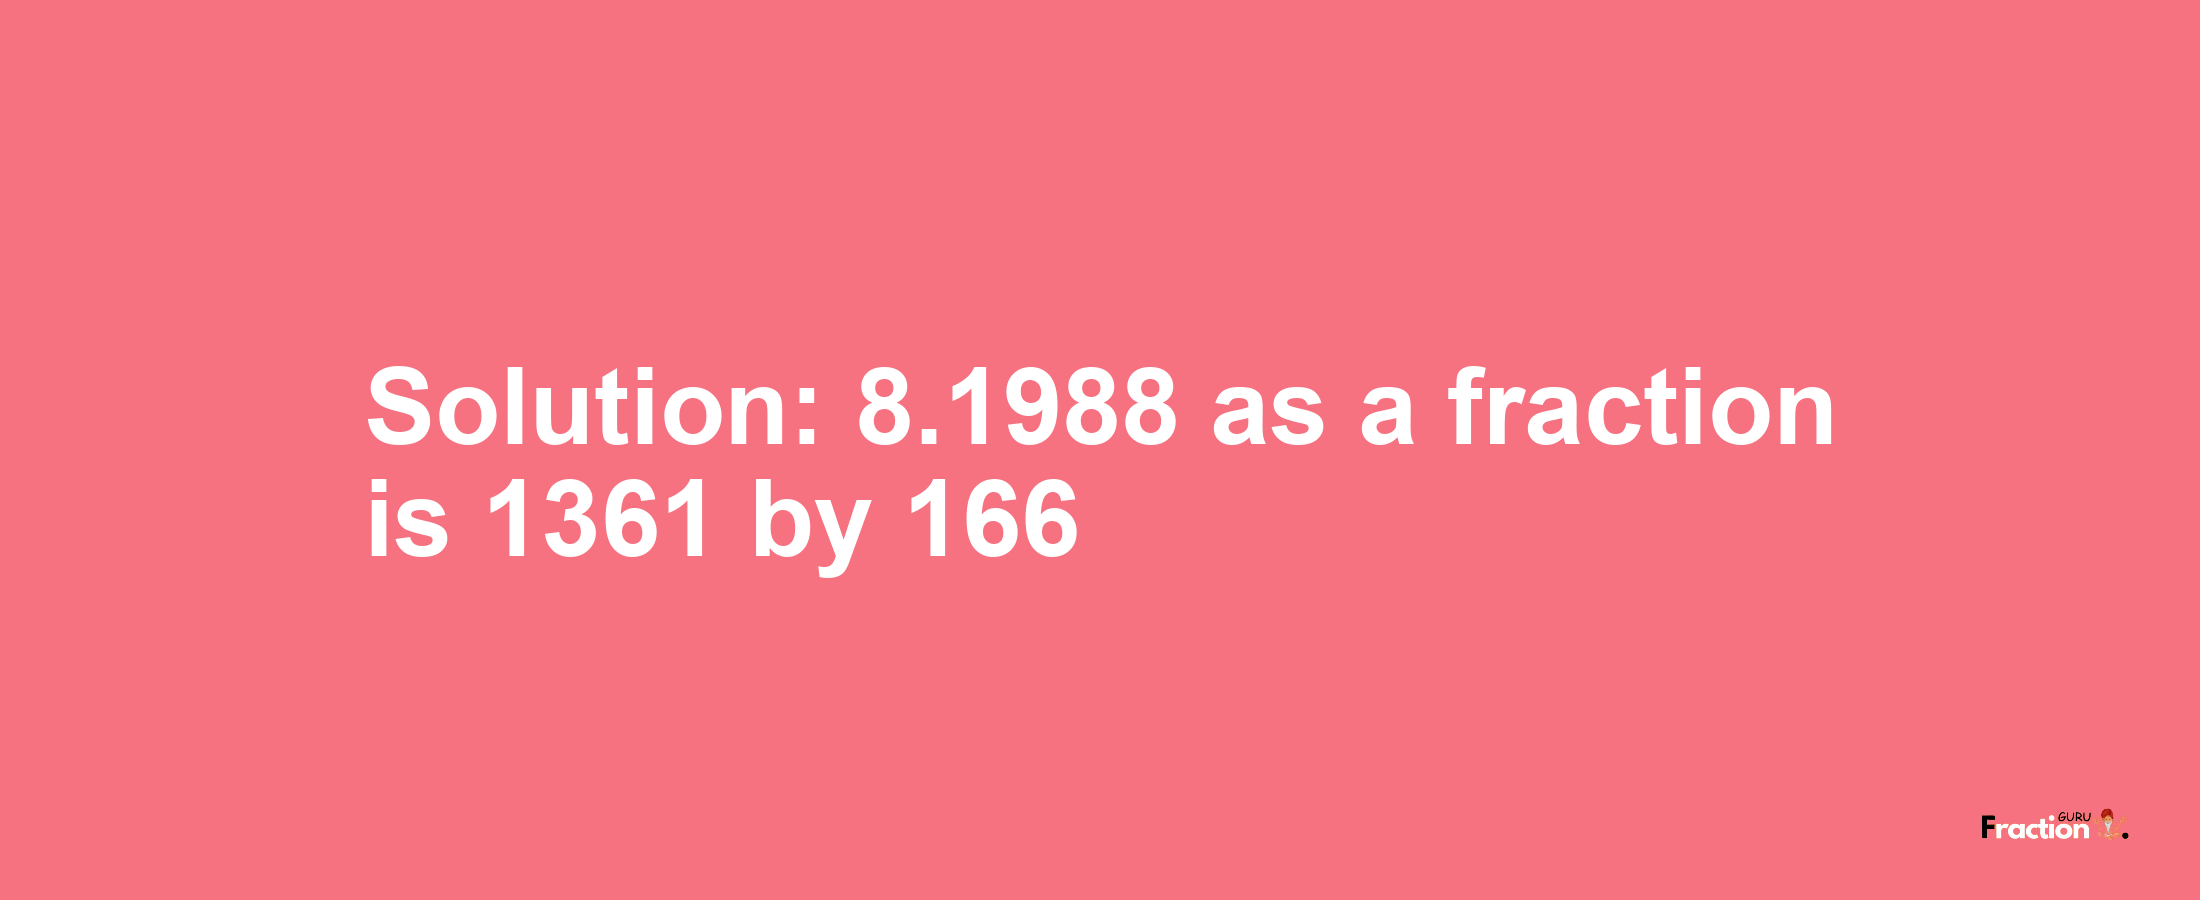 Solution:8.1988 as a fraction is 1361/166